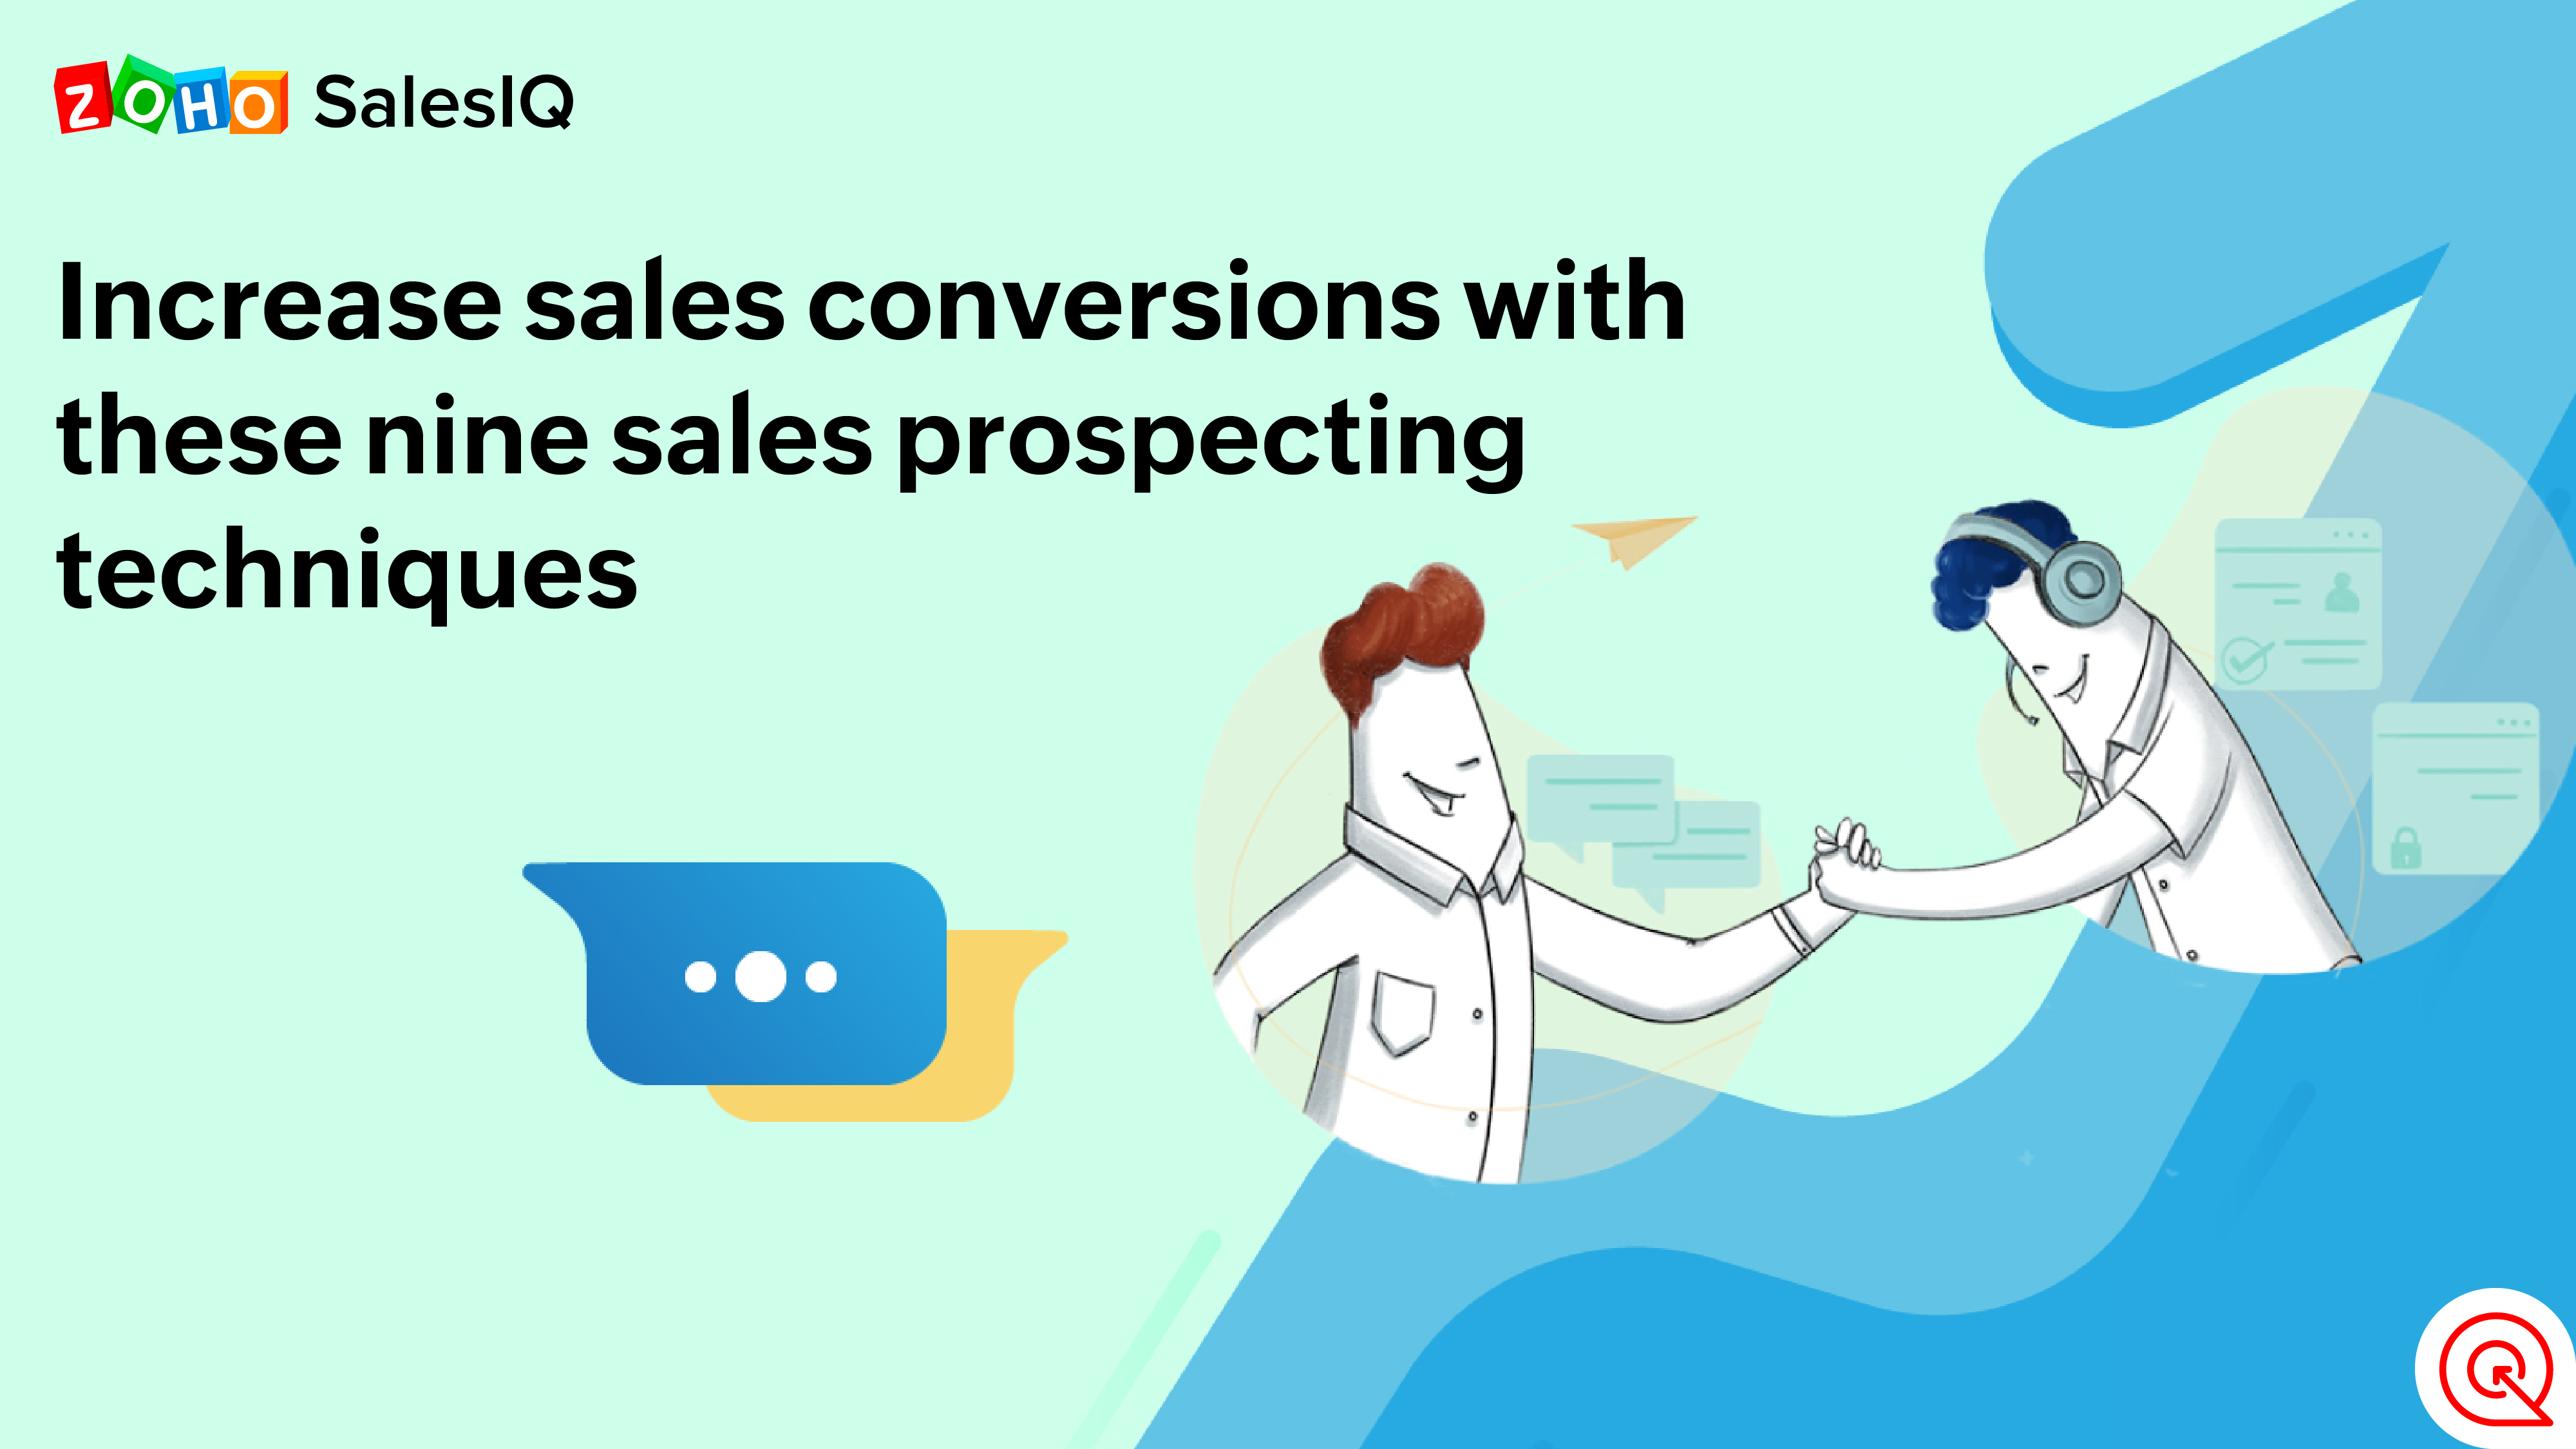 Increase sales conversions with these nine sales prospecting techniques